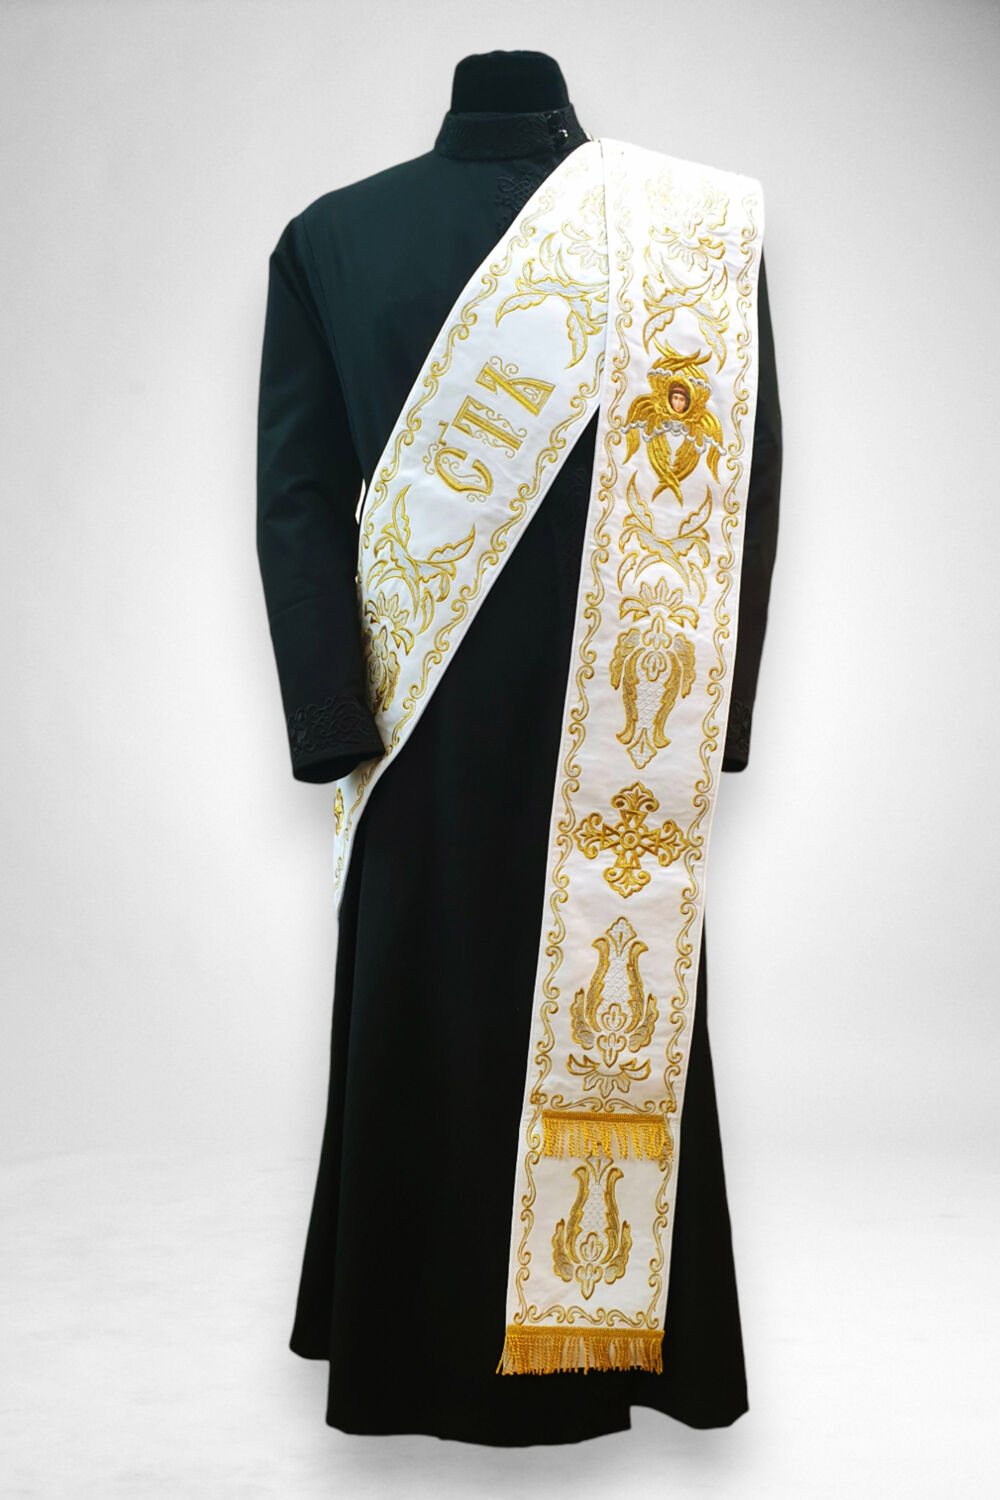 Double orarion with embroidery on white velvet